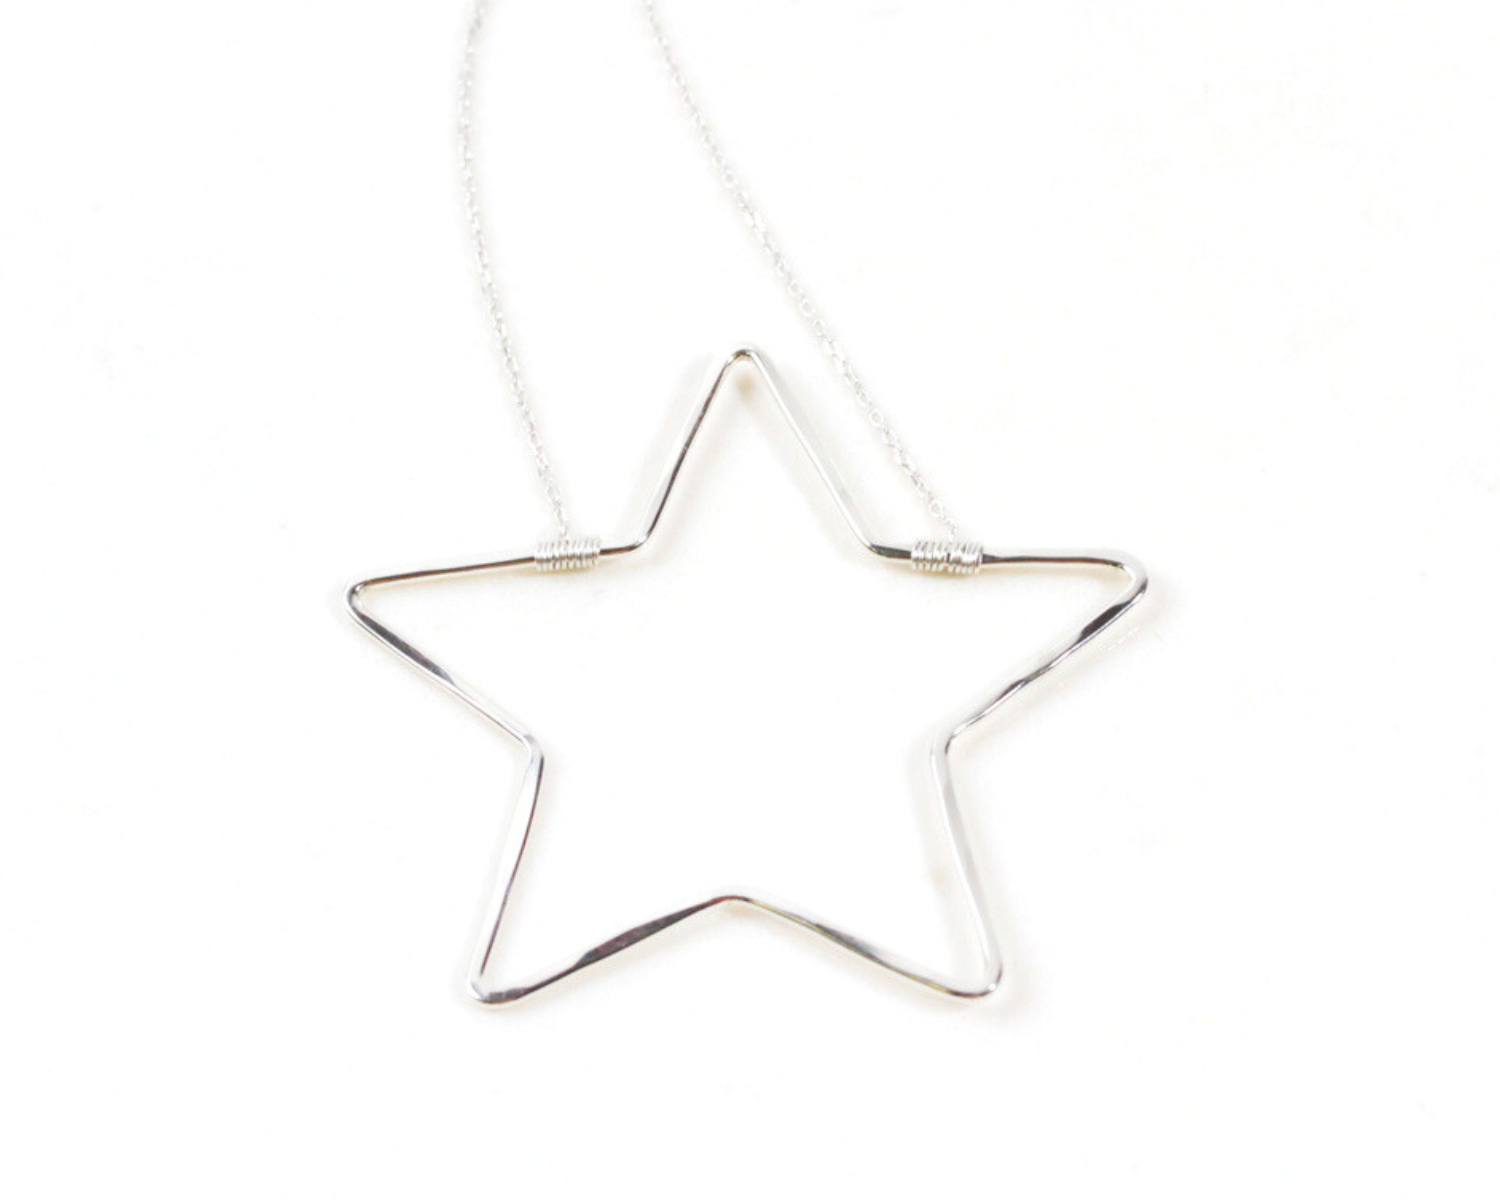 Every aspect of this celestial treasure is intentional. The 1mm chain is expertly wire wrapped to the star pendant for enduring strength. Have your Shining Star Necklace handcrafted in 925 Sterling Silver or 14 karat Gold Filled.